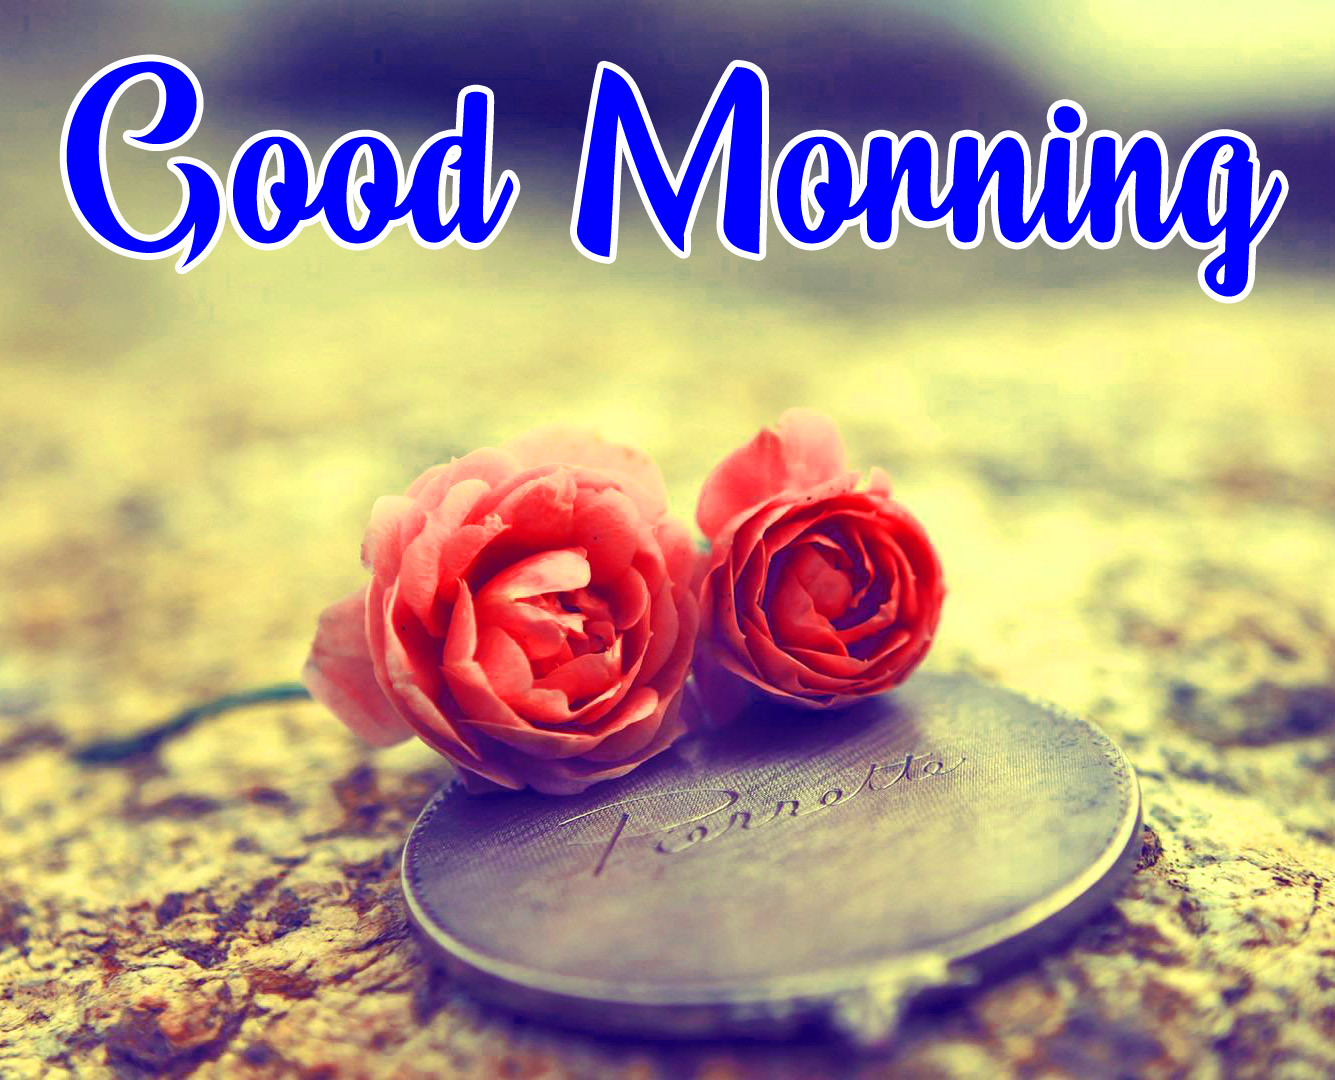 Flowers Love Good Morning Images For Whatsapp